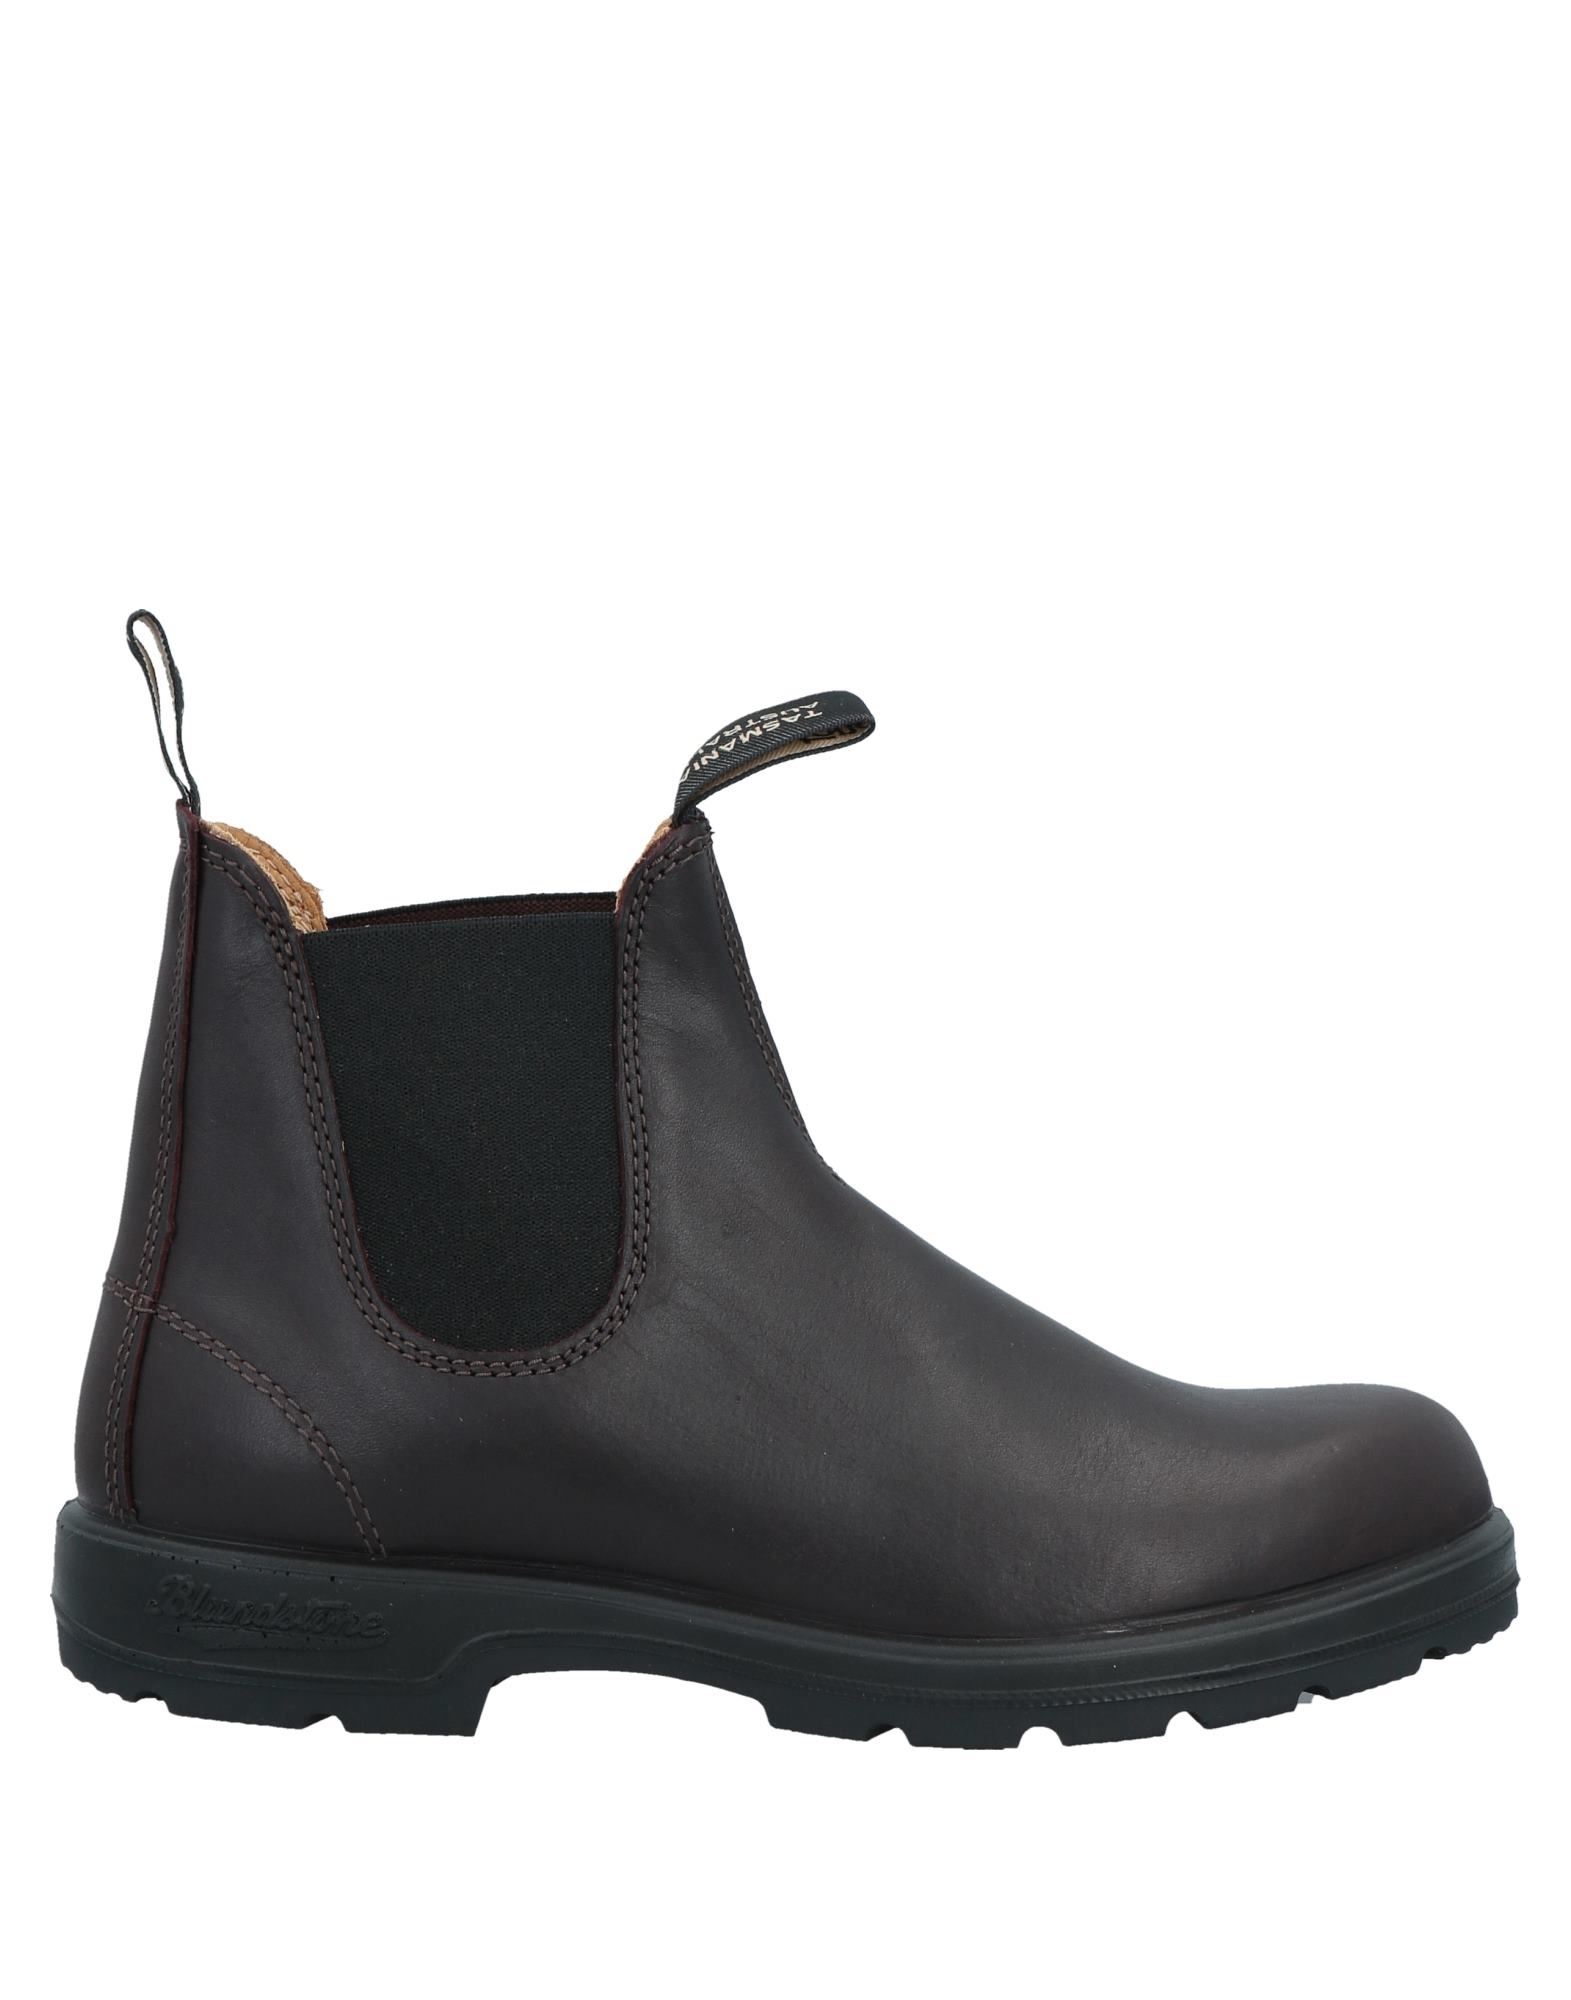 BLUNDSTONE ANKLE BOOTS